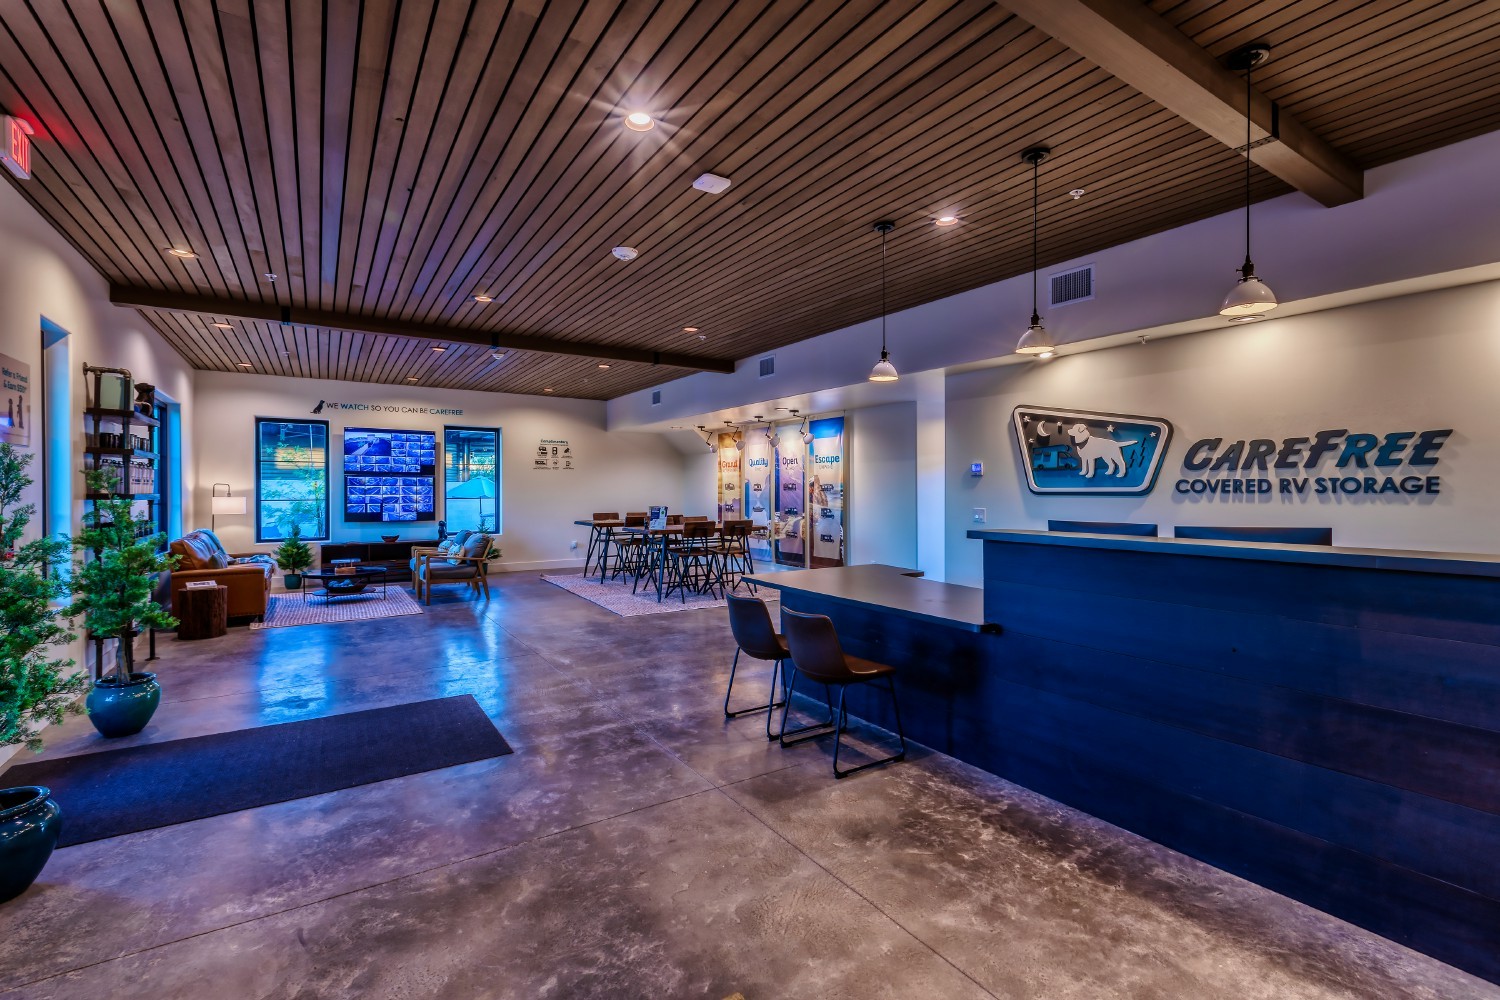 Our on-site team members work in a beautiful Welcome Center with space for customers to visit.